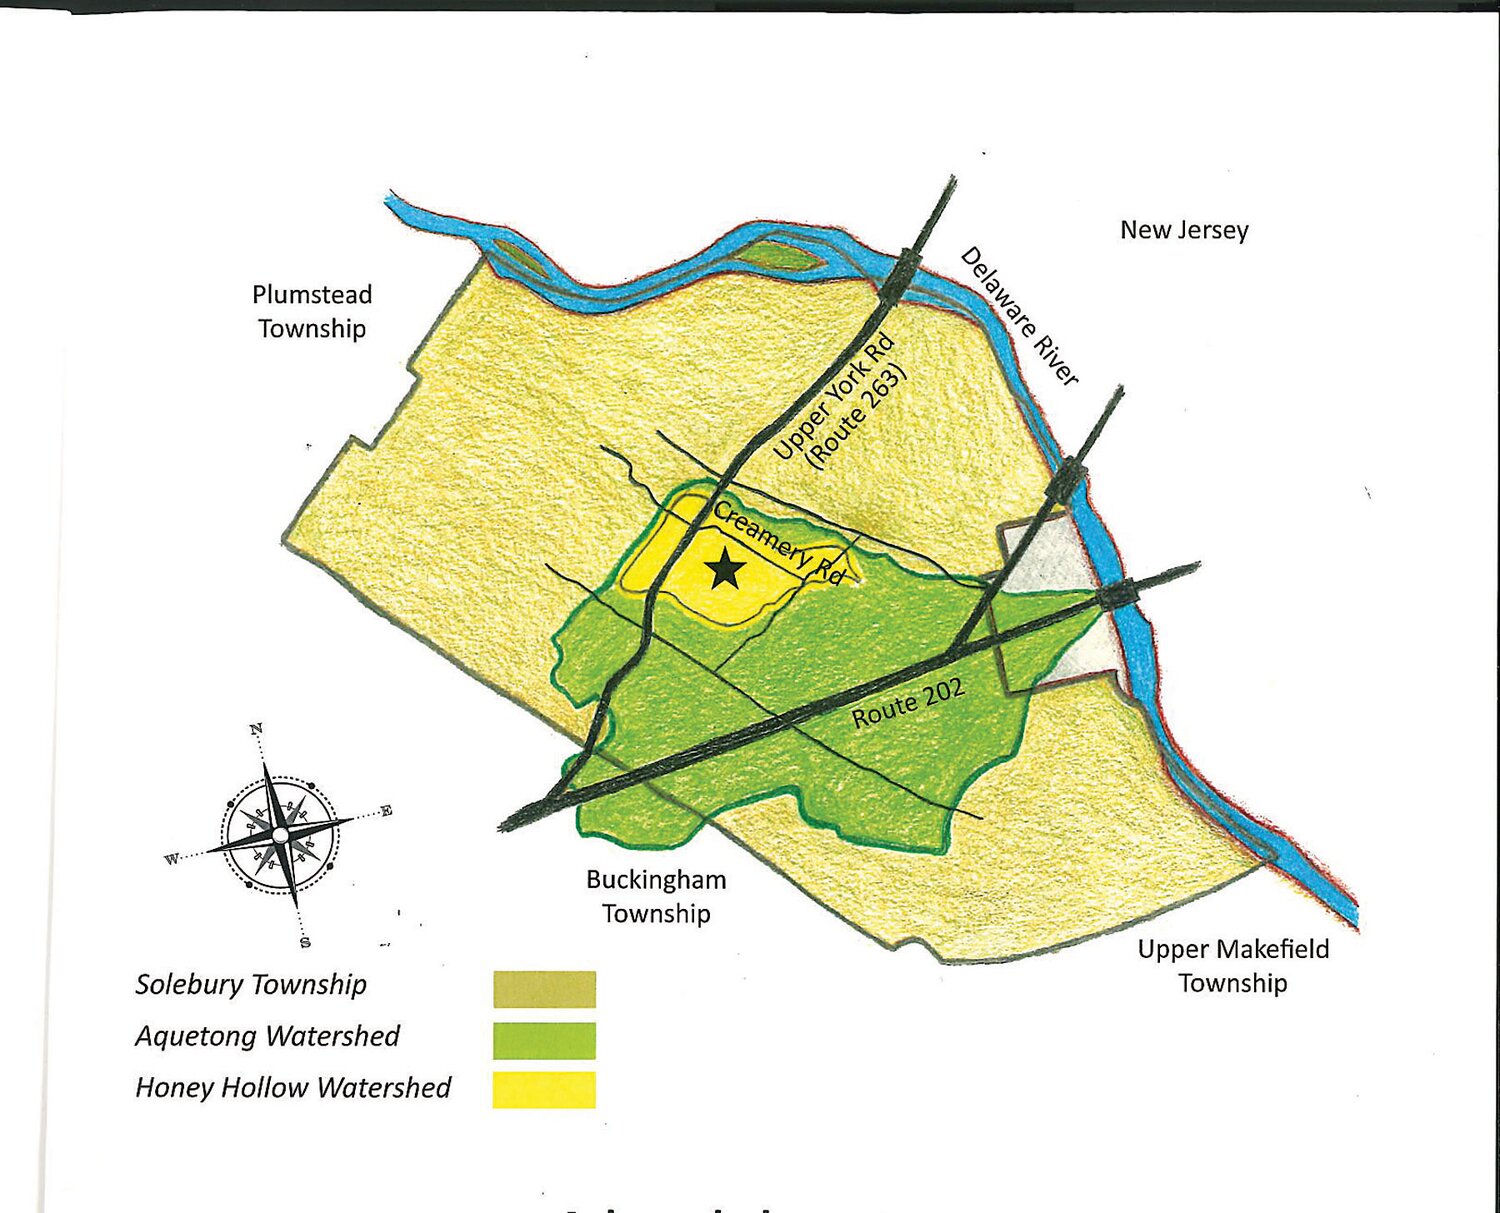 The Honey Hollow Watershed (yellow) covers a corner of the Aquetong Watershed in Solebury and Buckingham townships.